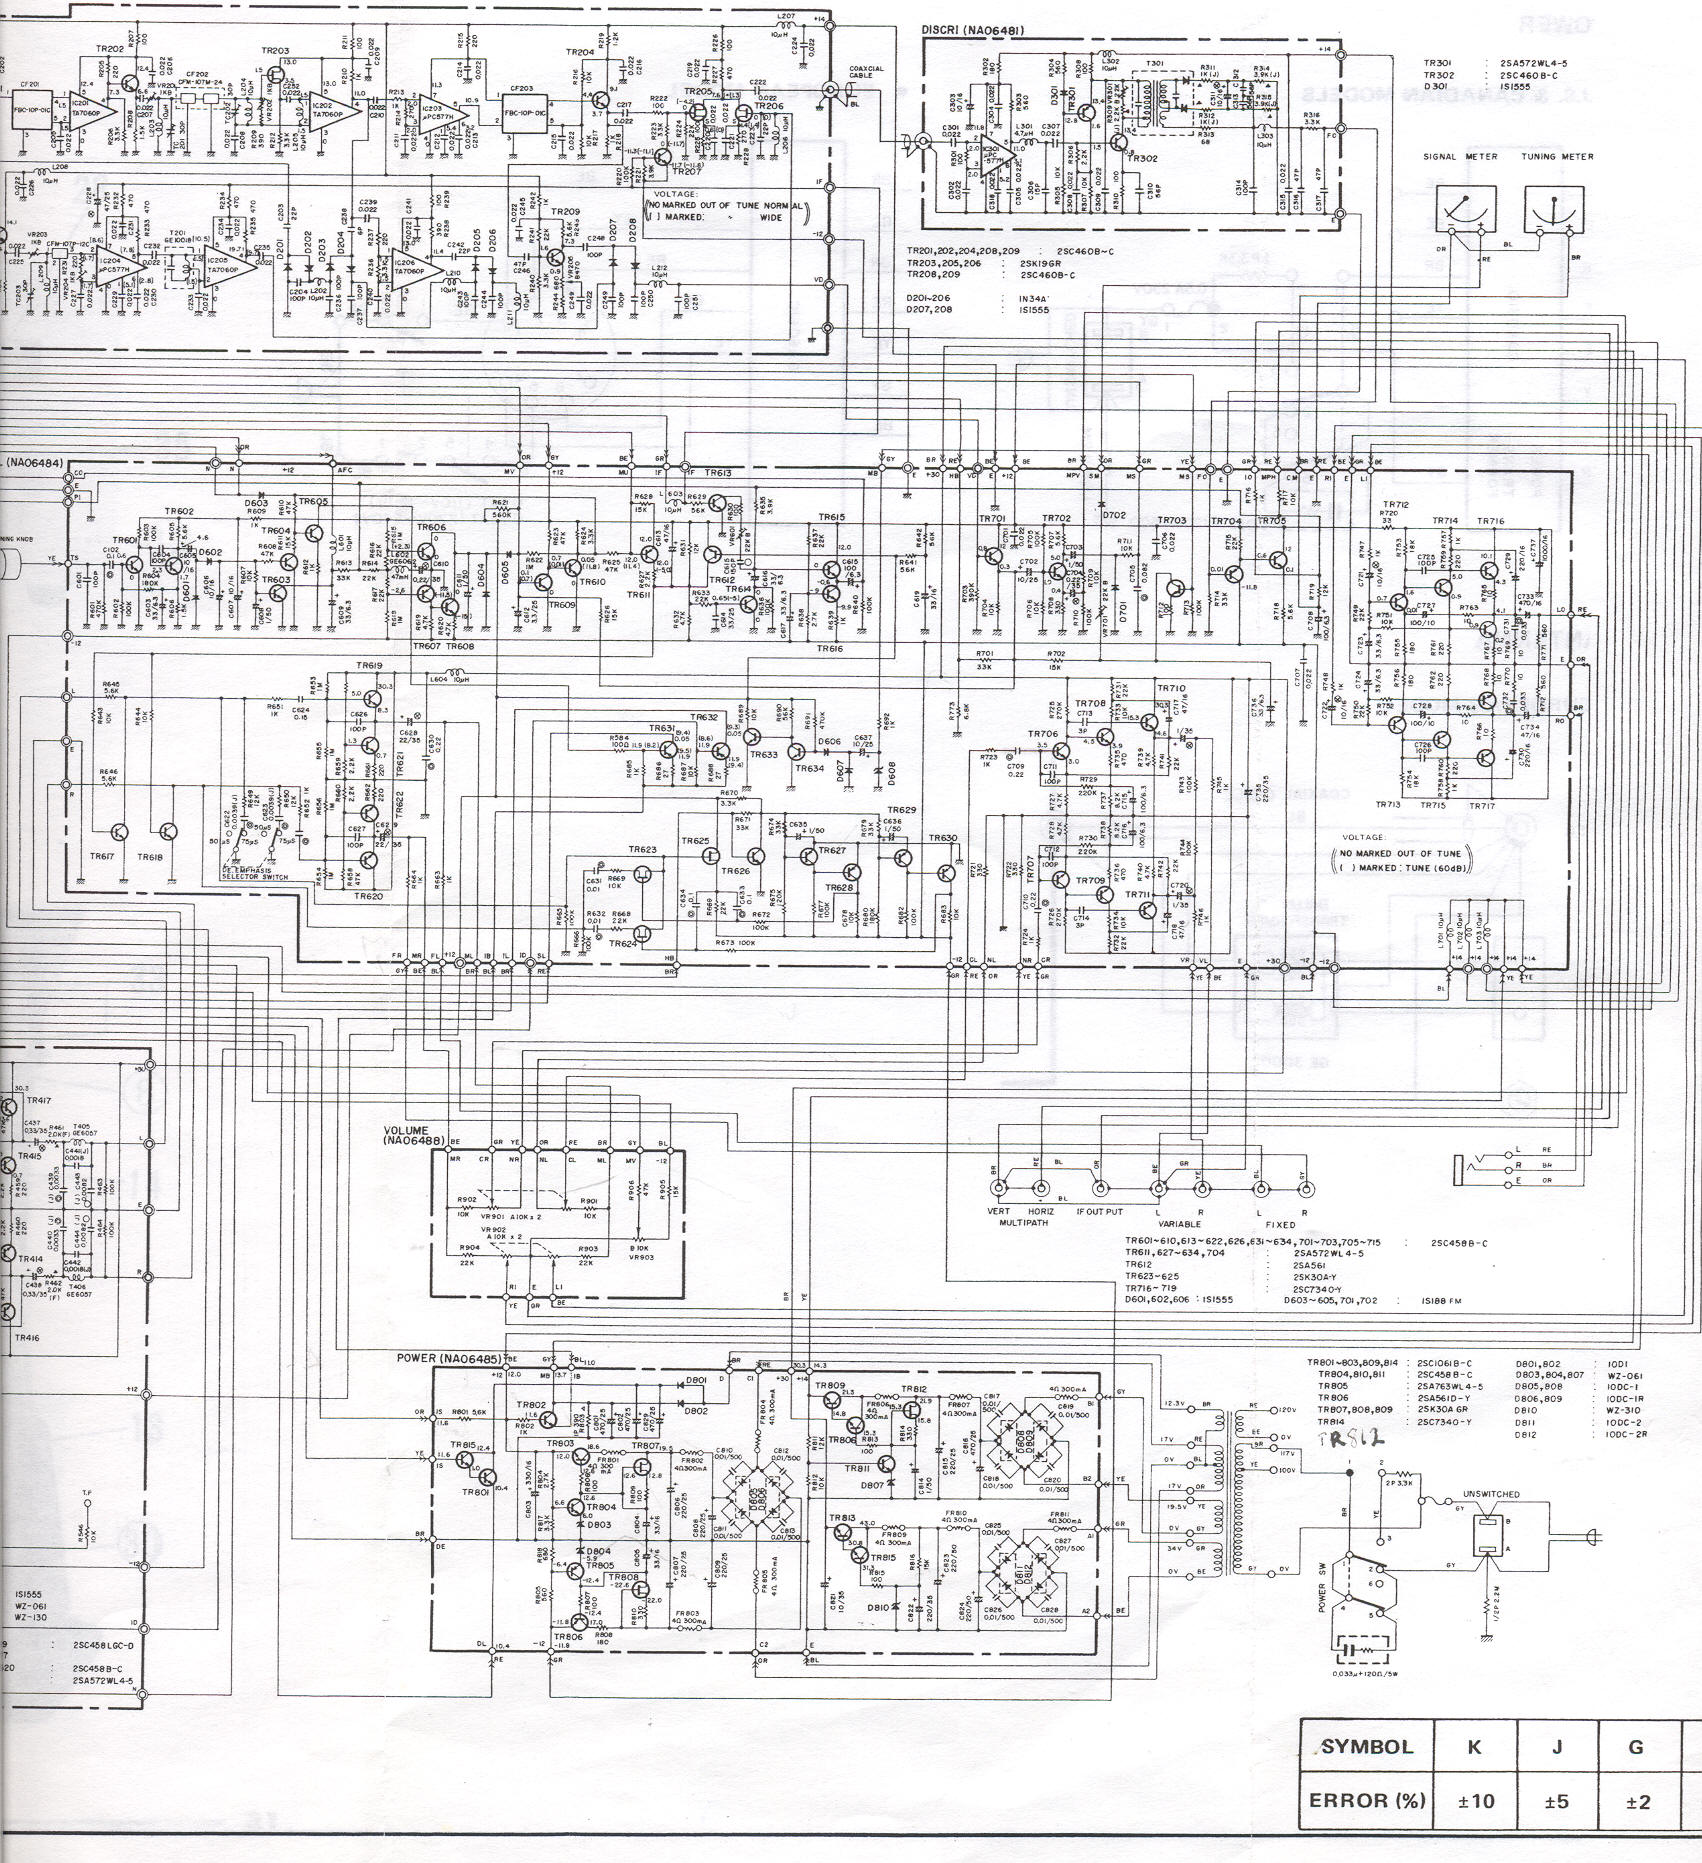 Wiring Diagram For Pioneer Super Tuner 3 D Deh 1500